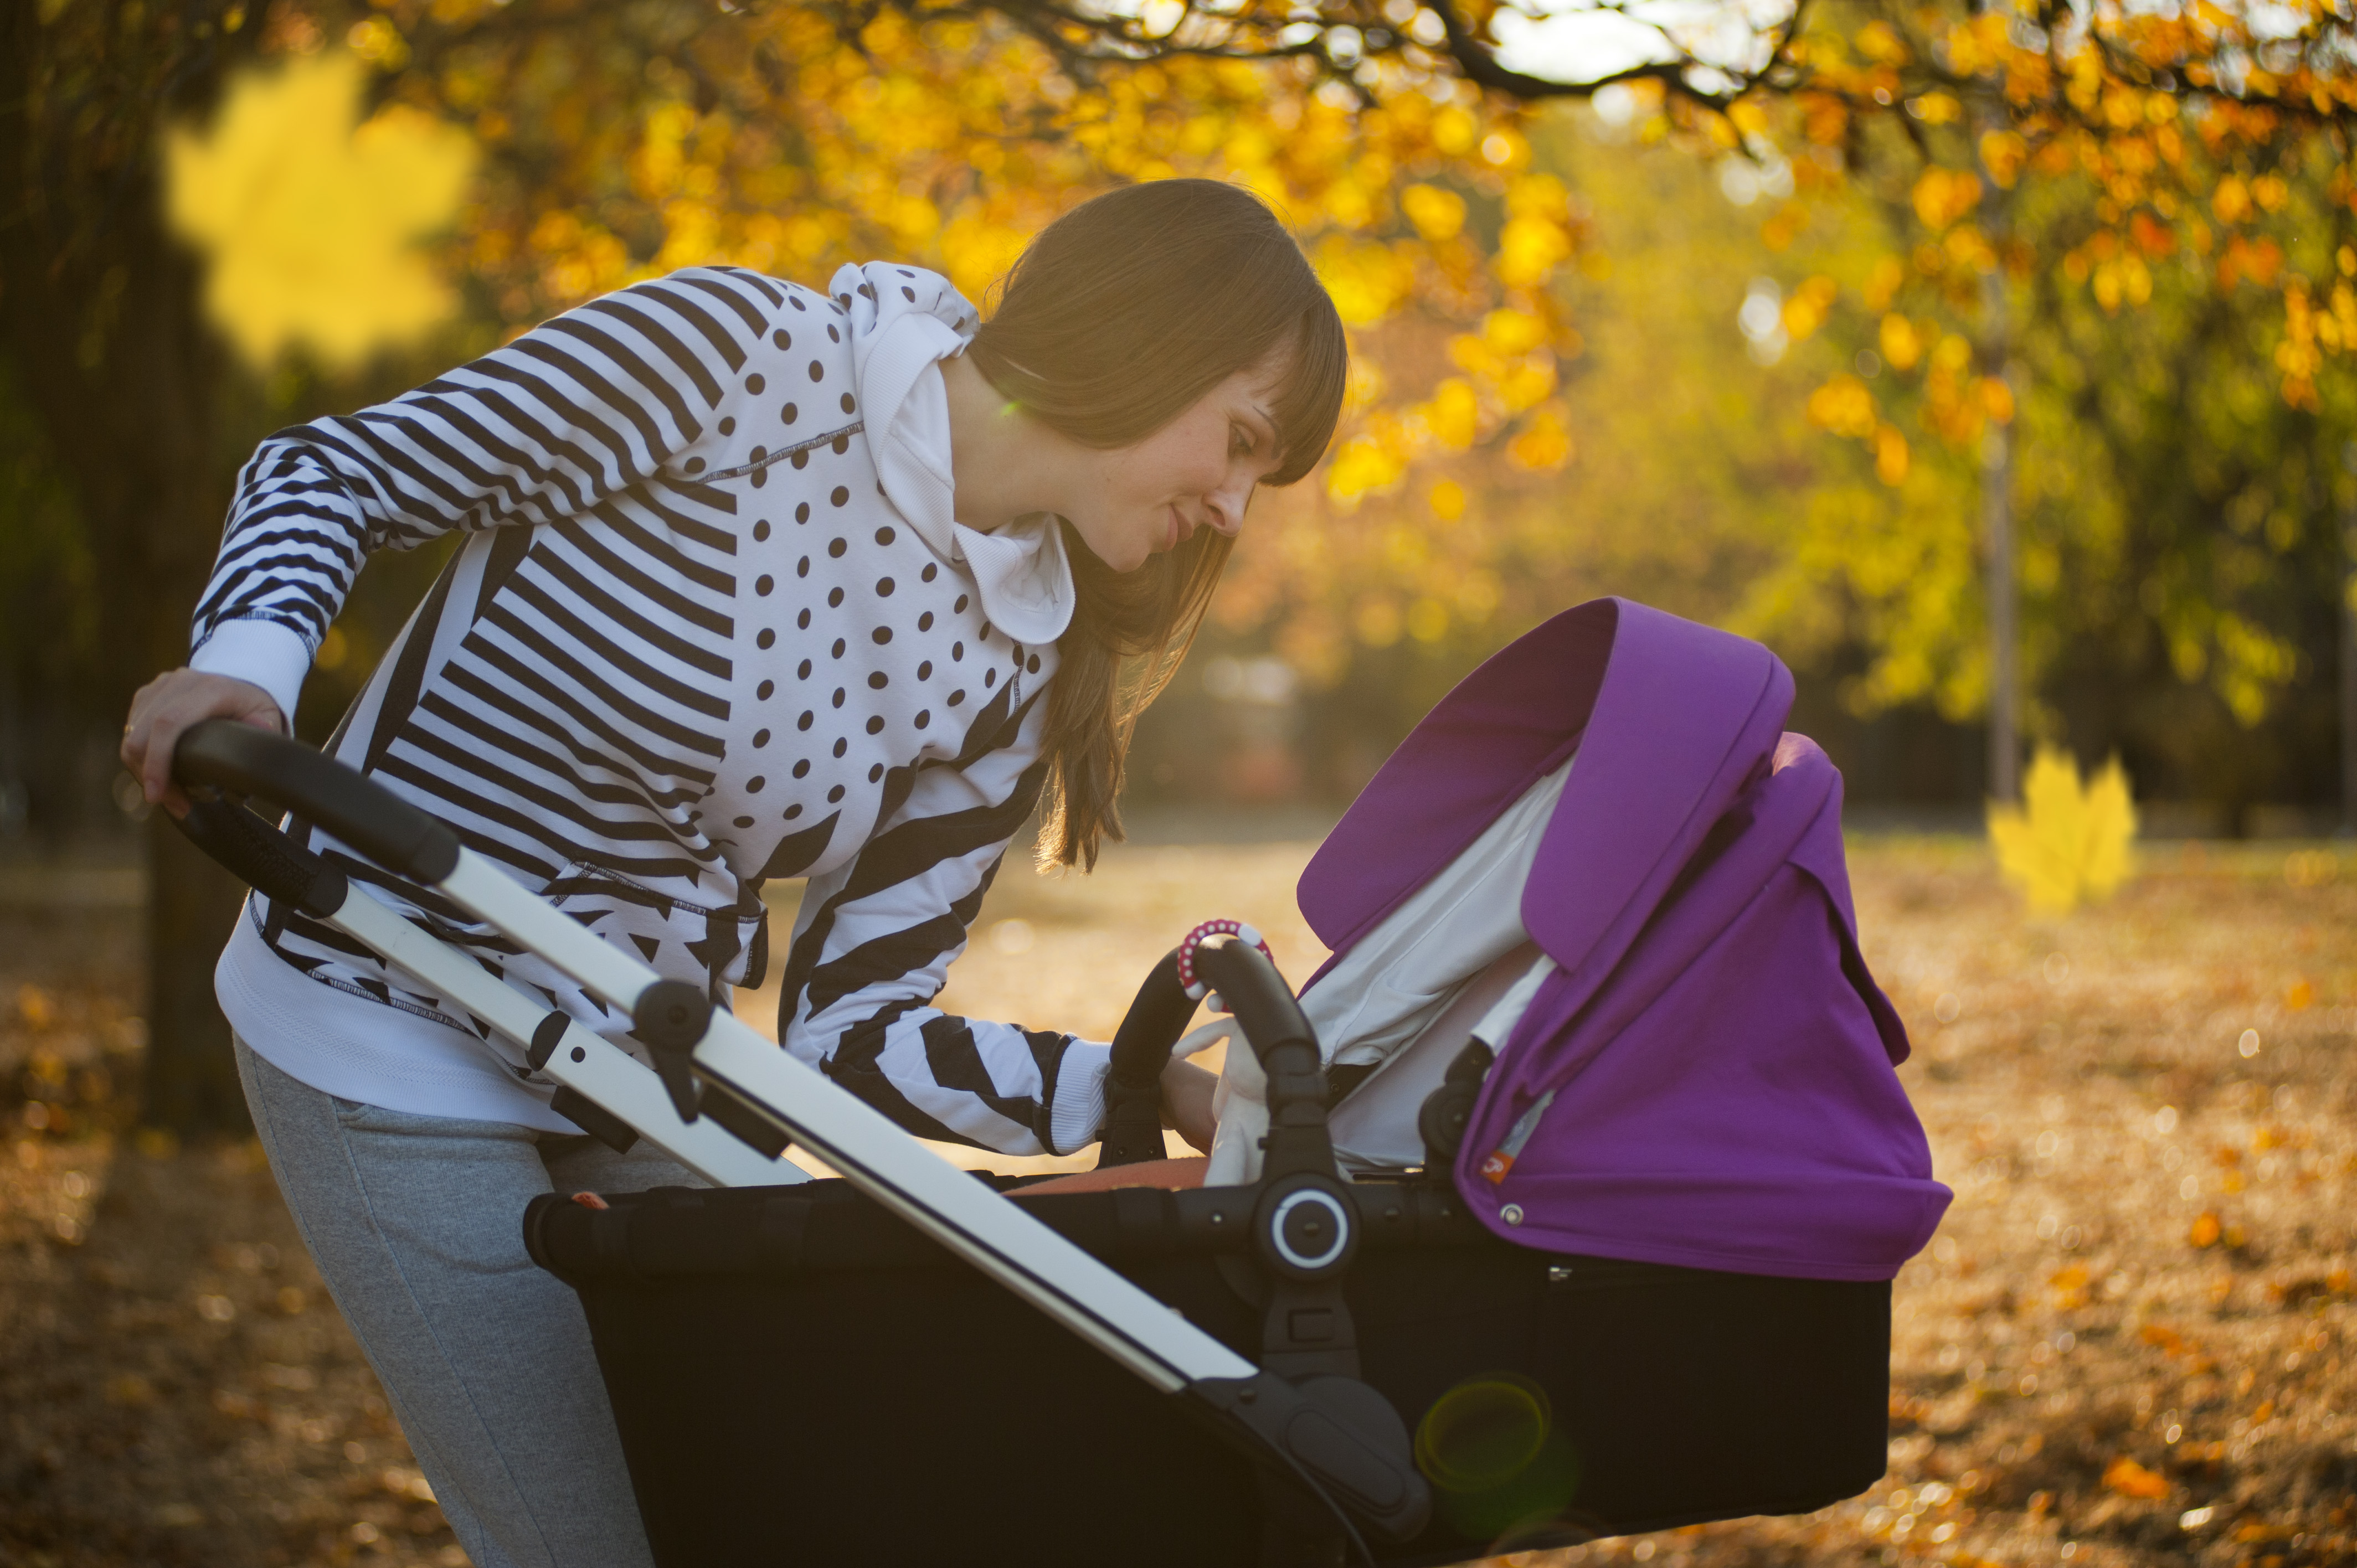 How to Choose the Best Pushchair for Your Baby